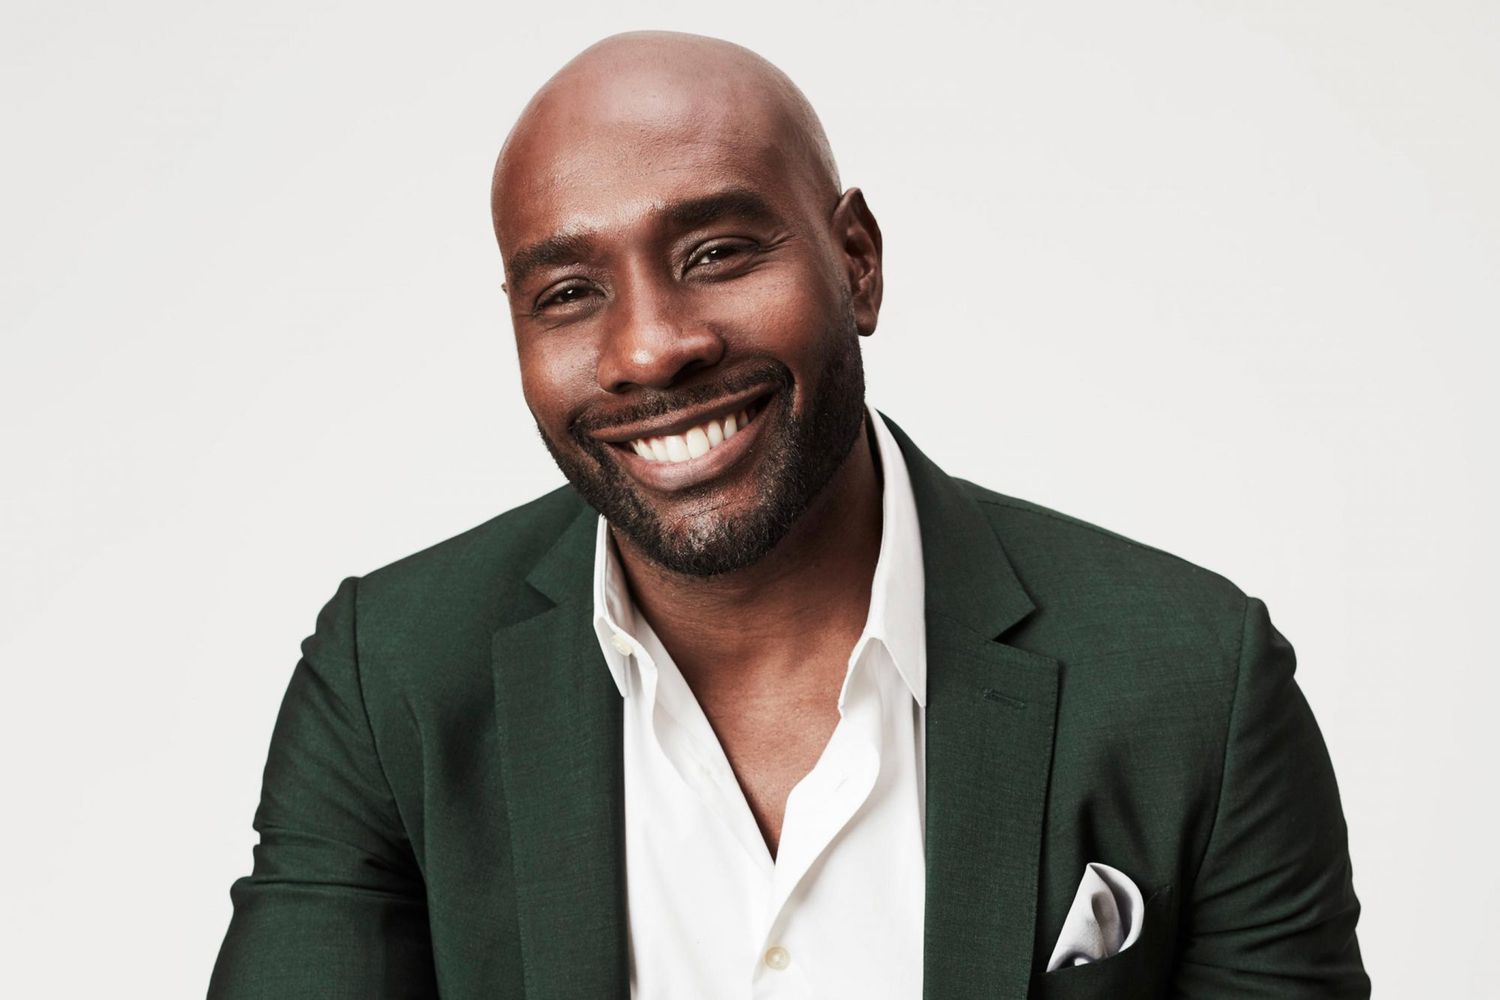 Morris Chestnut on his movies: From Boyz n the Hood to The Best Man